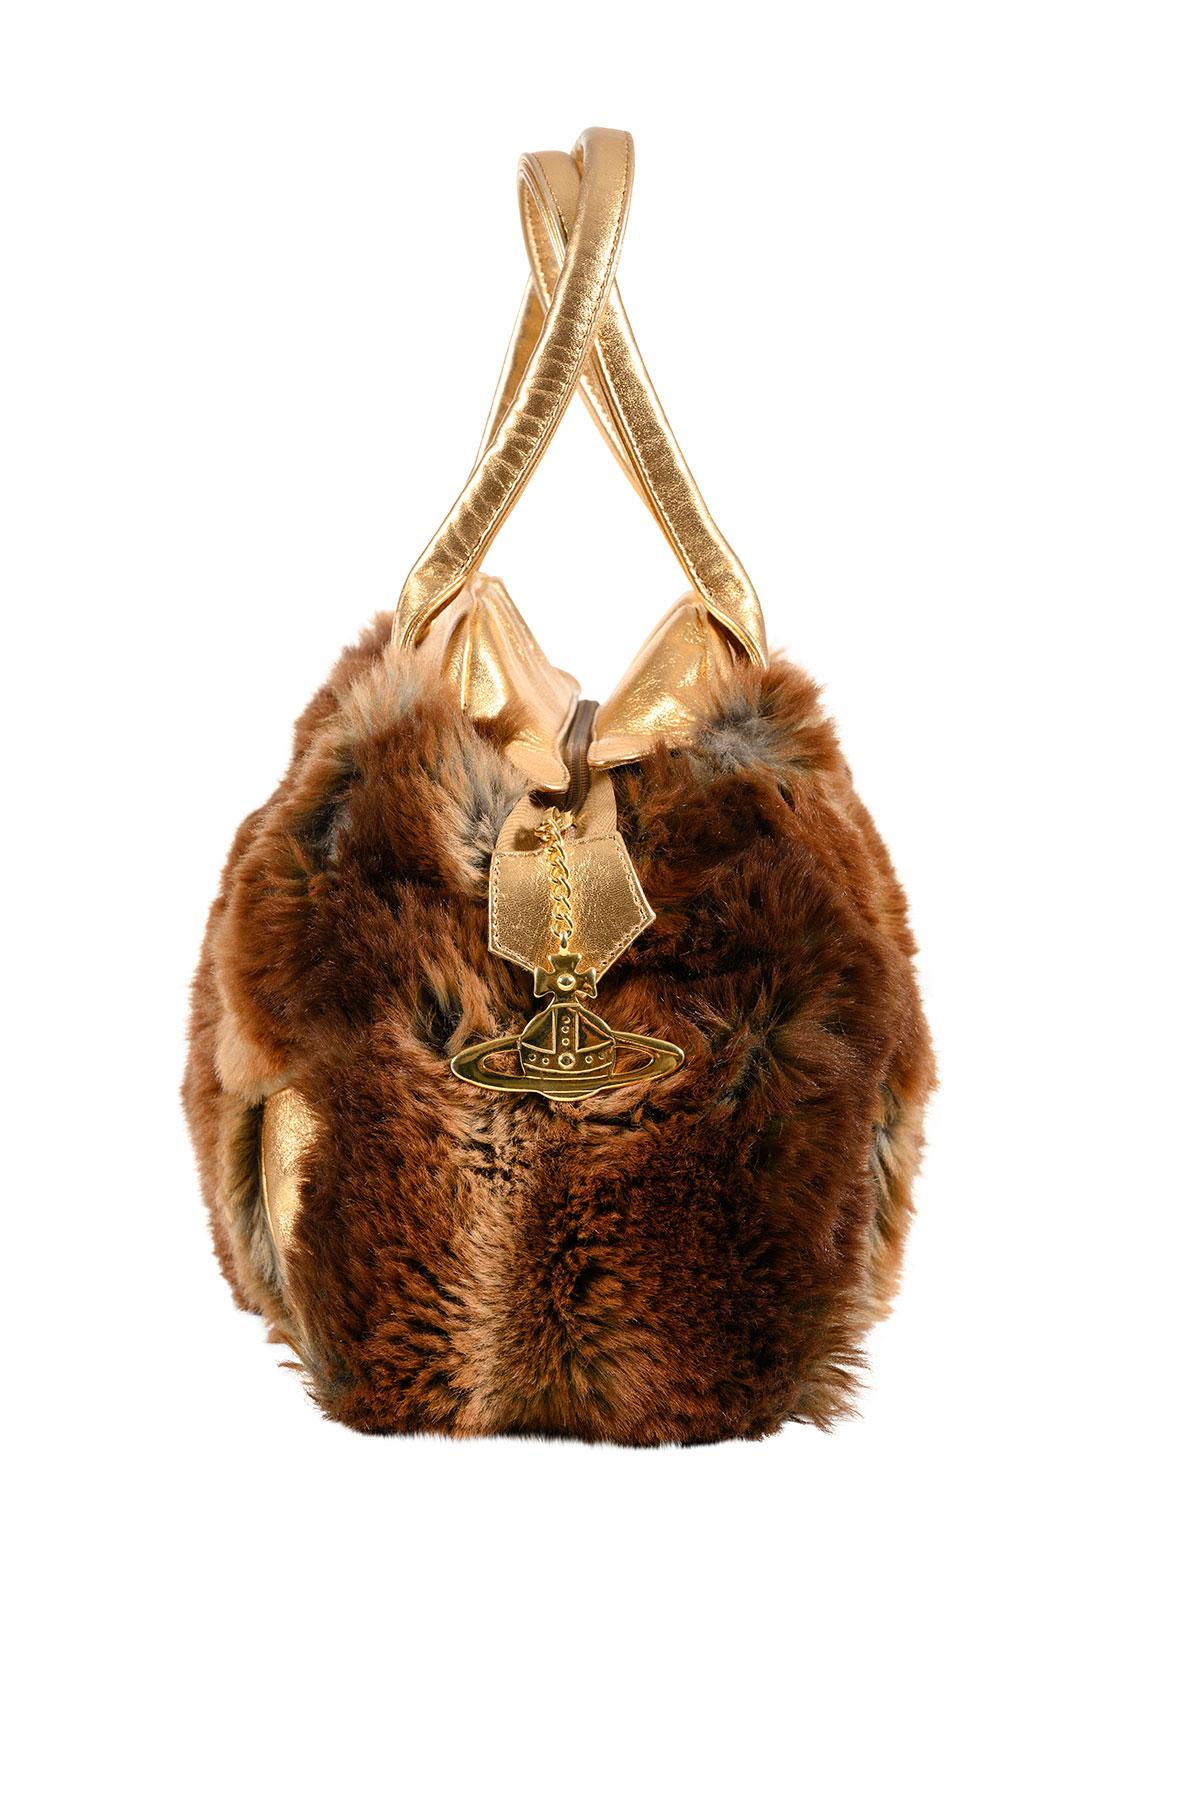 1995 Fall Winter fake fur and leather bag from “Vive La Cocotte